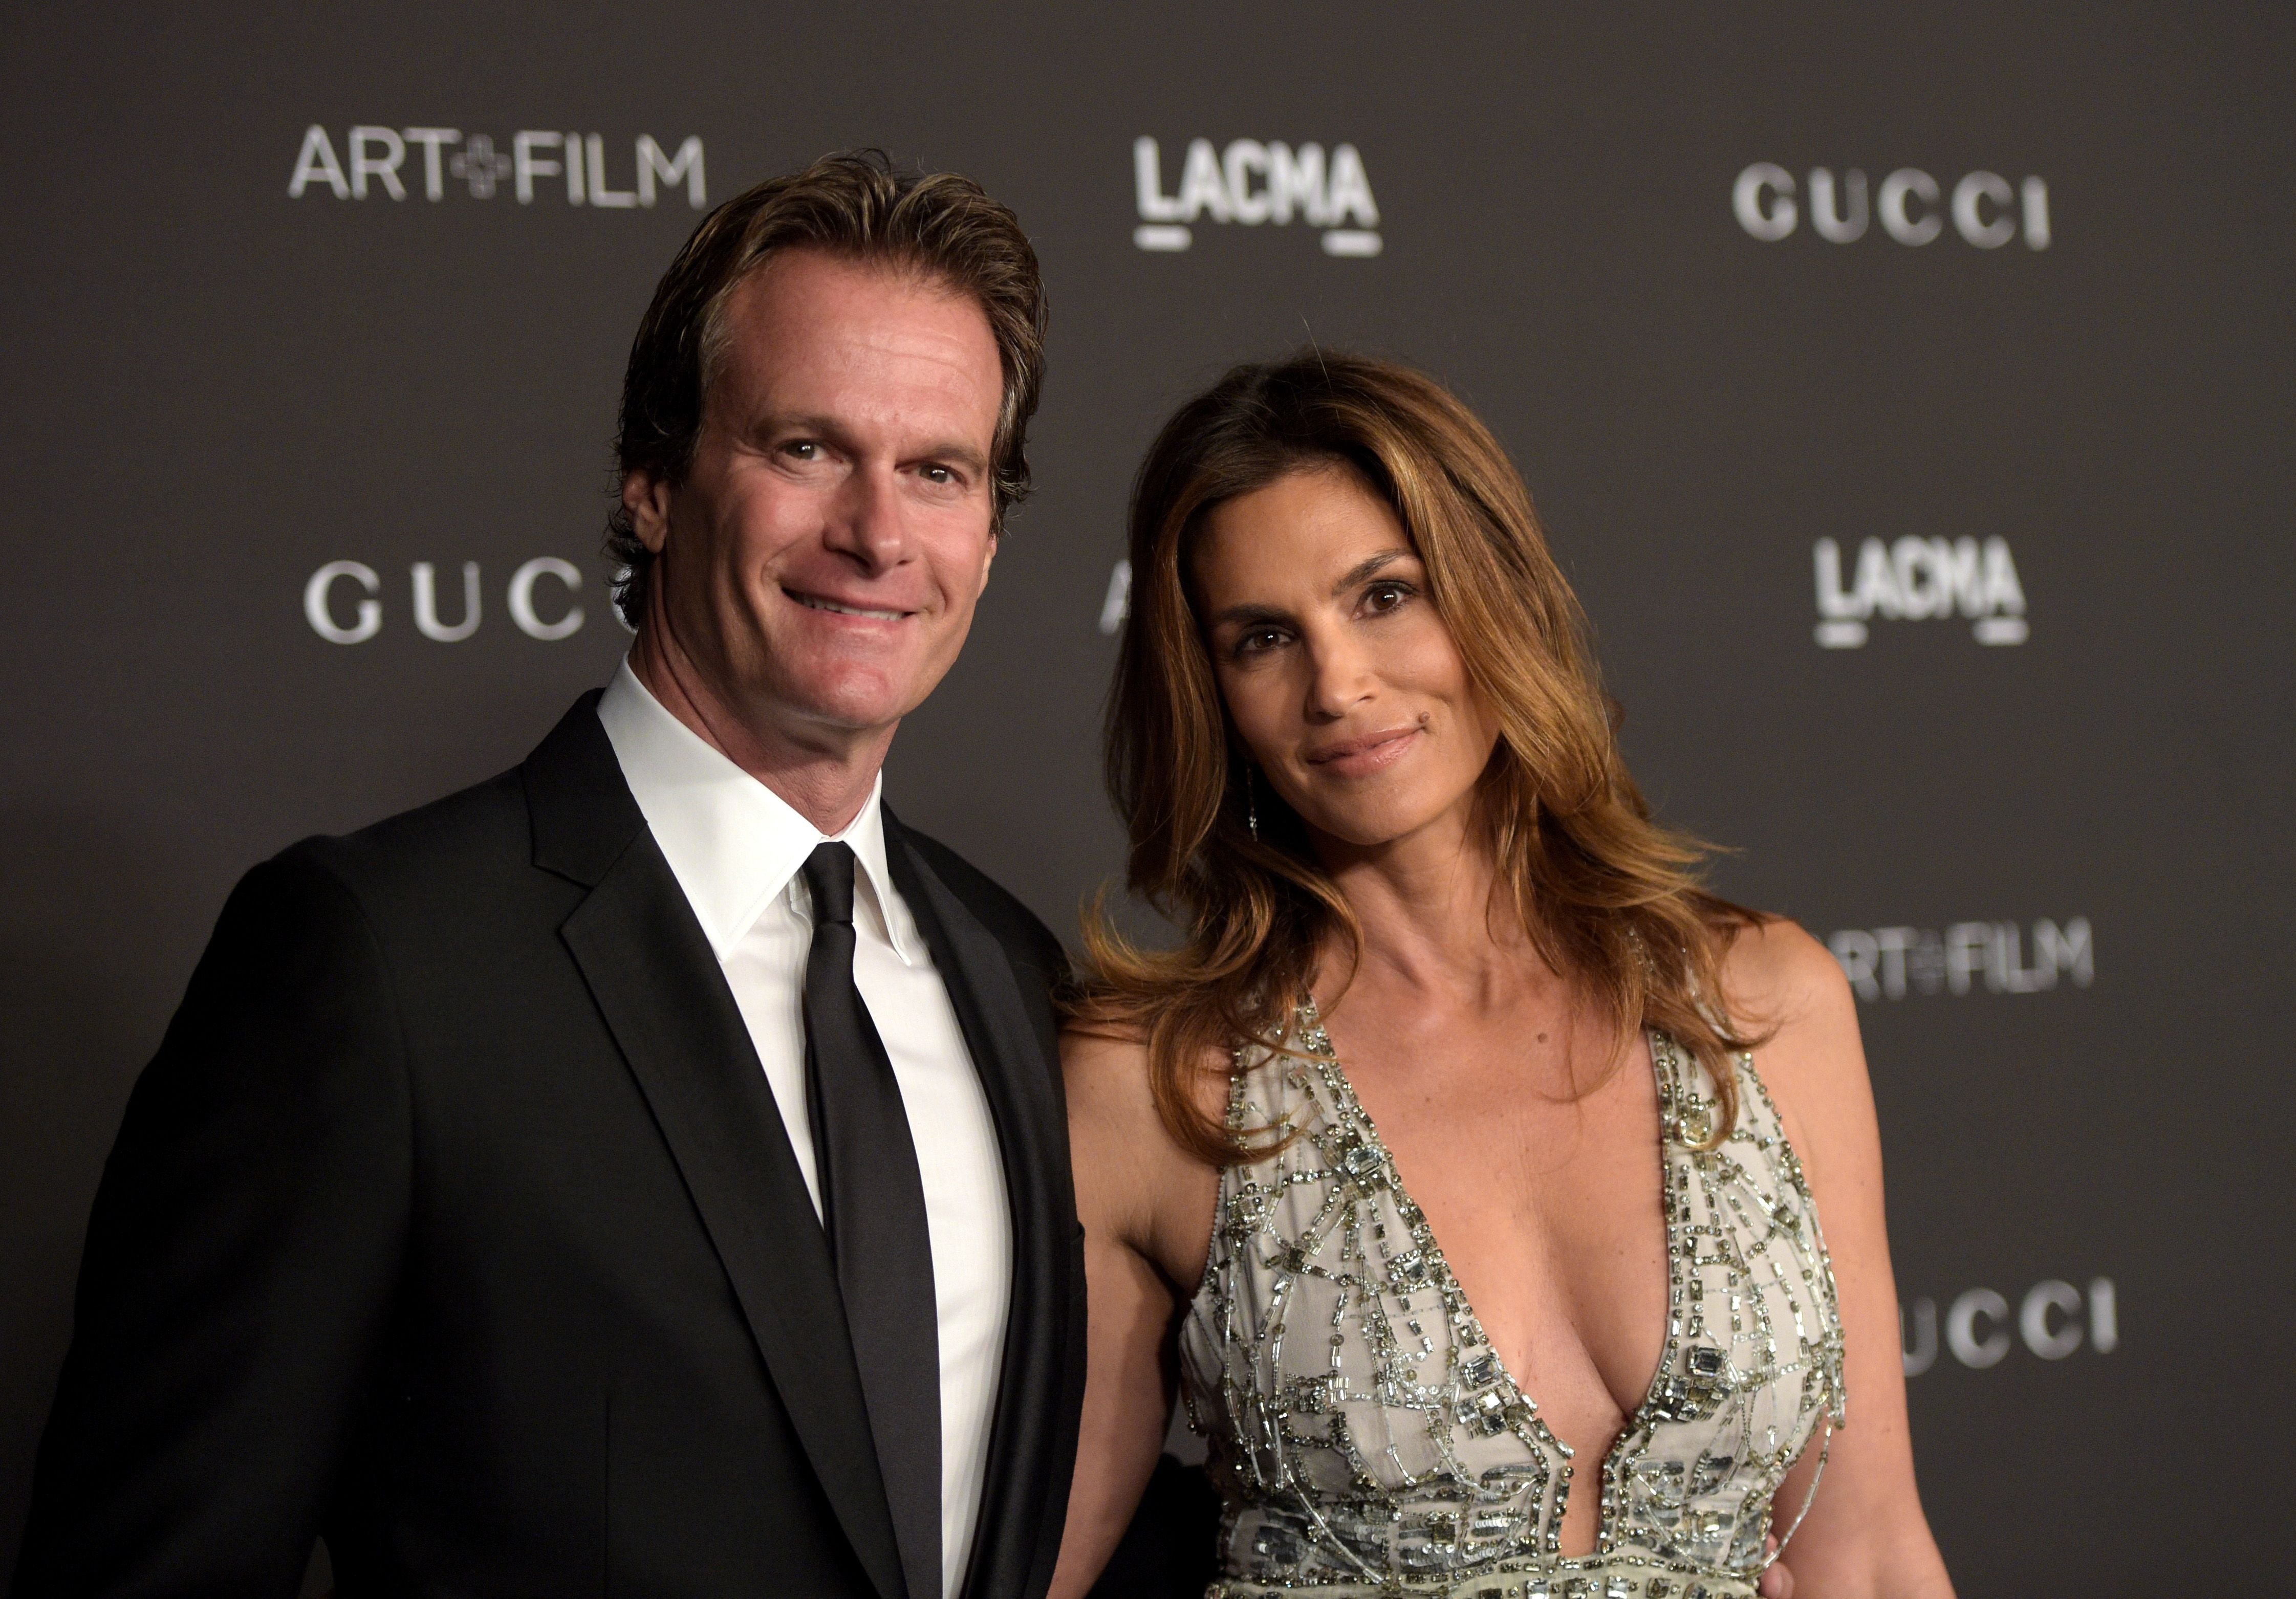 Cindy Crawford and Rande Gerber at the 2014 LACMA Art + Film Gala on November 1, 2014 | Photo: Getty Images